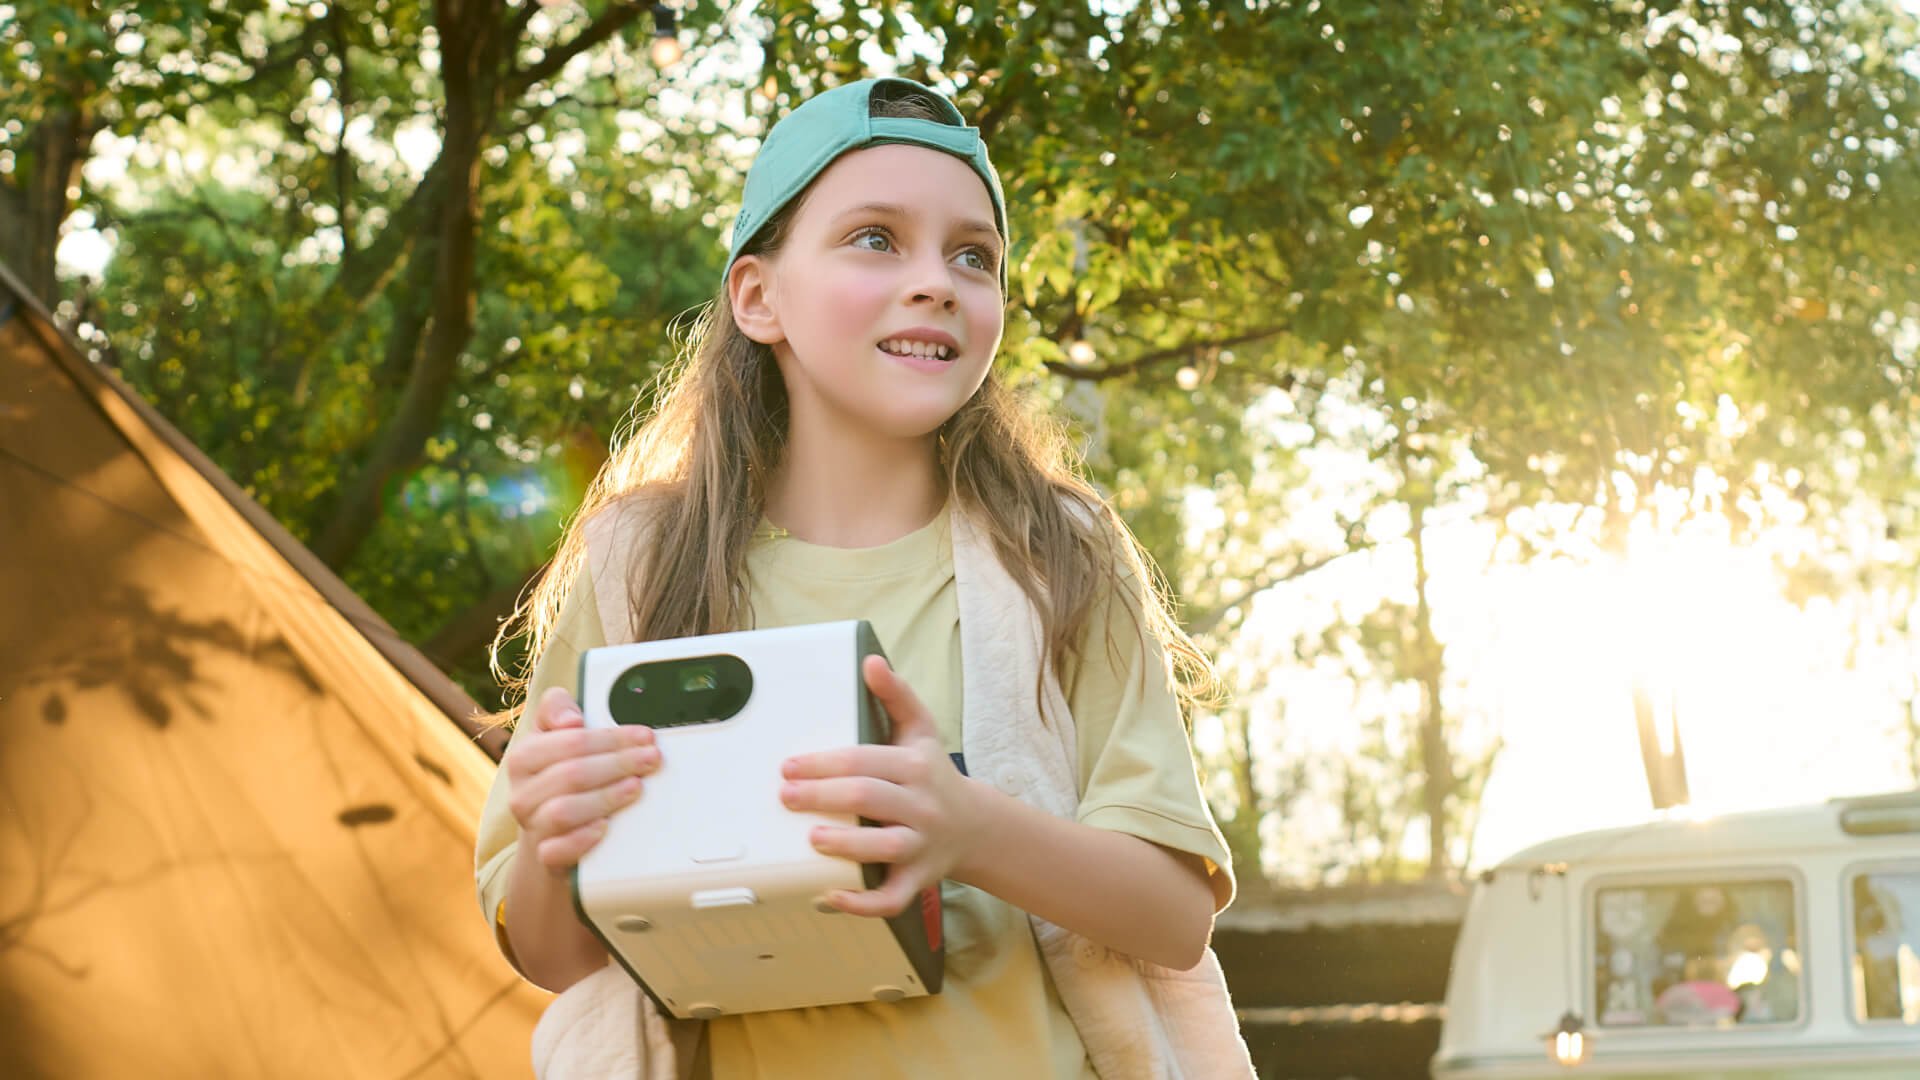 GS50 is designed to provide safe viewing for kids